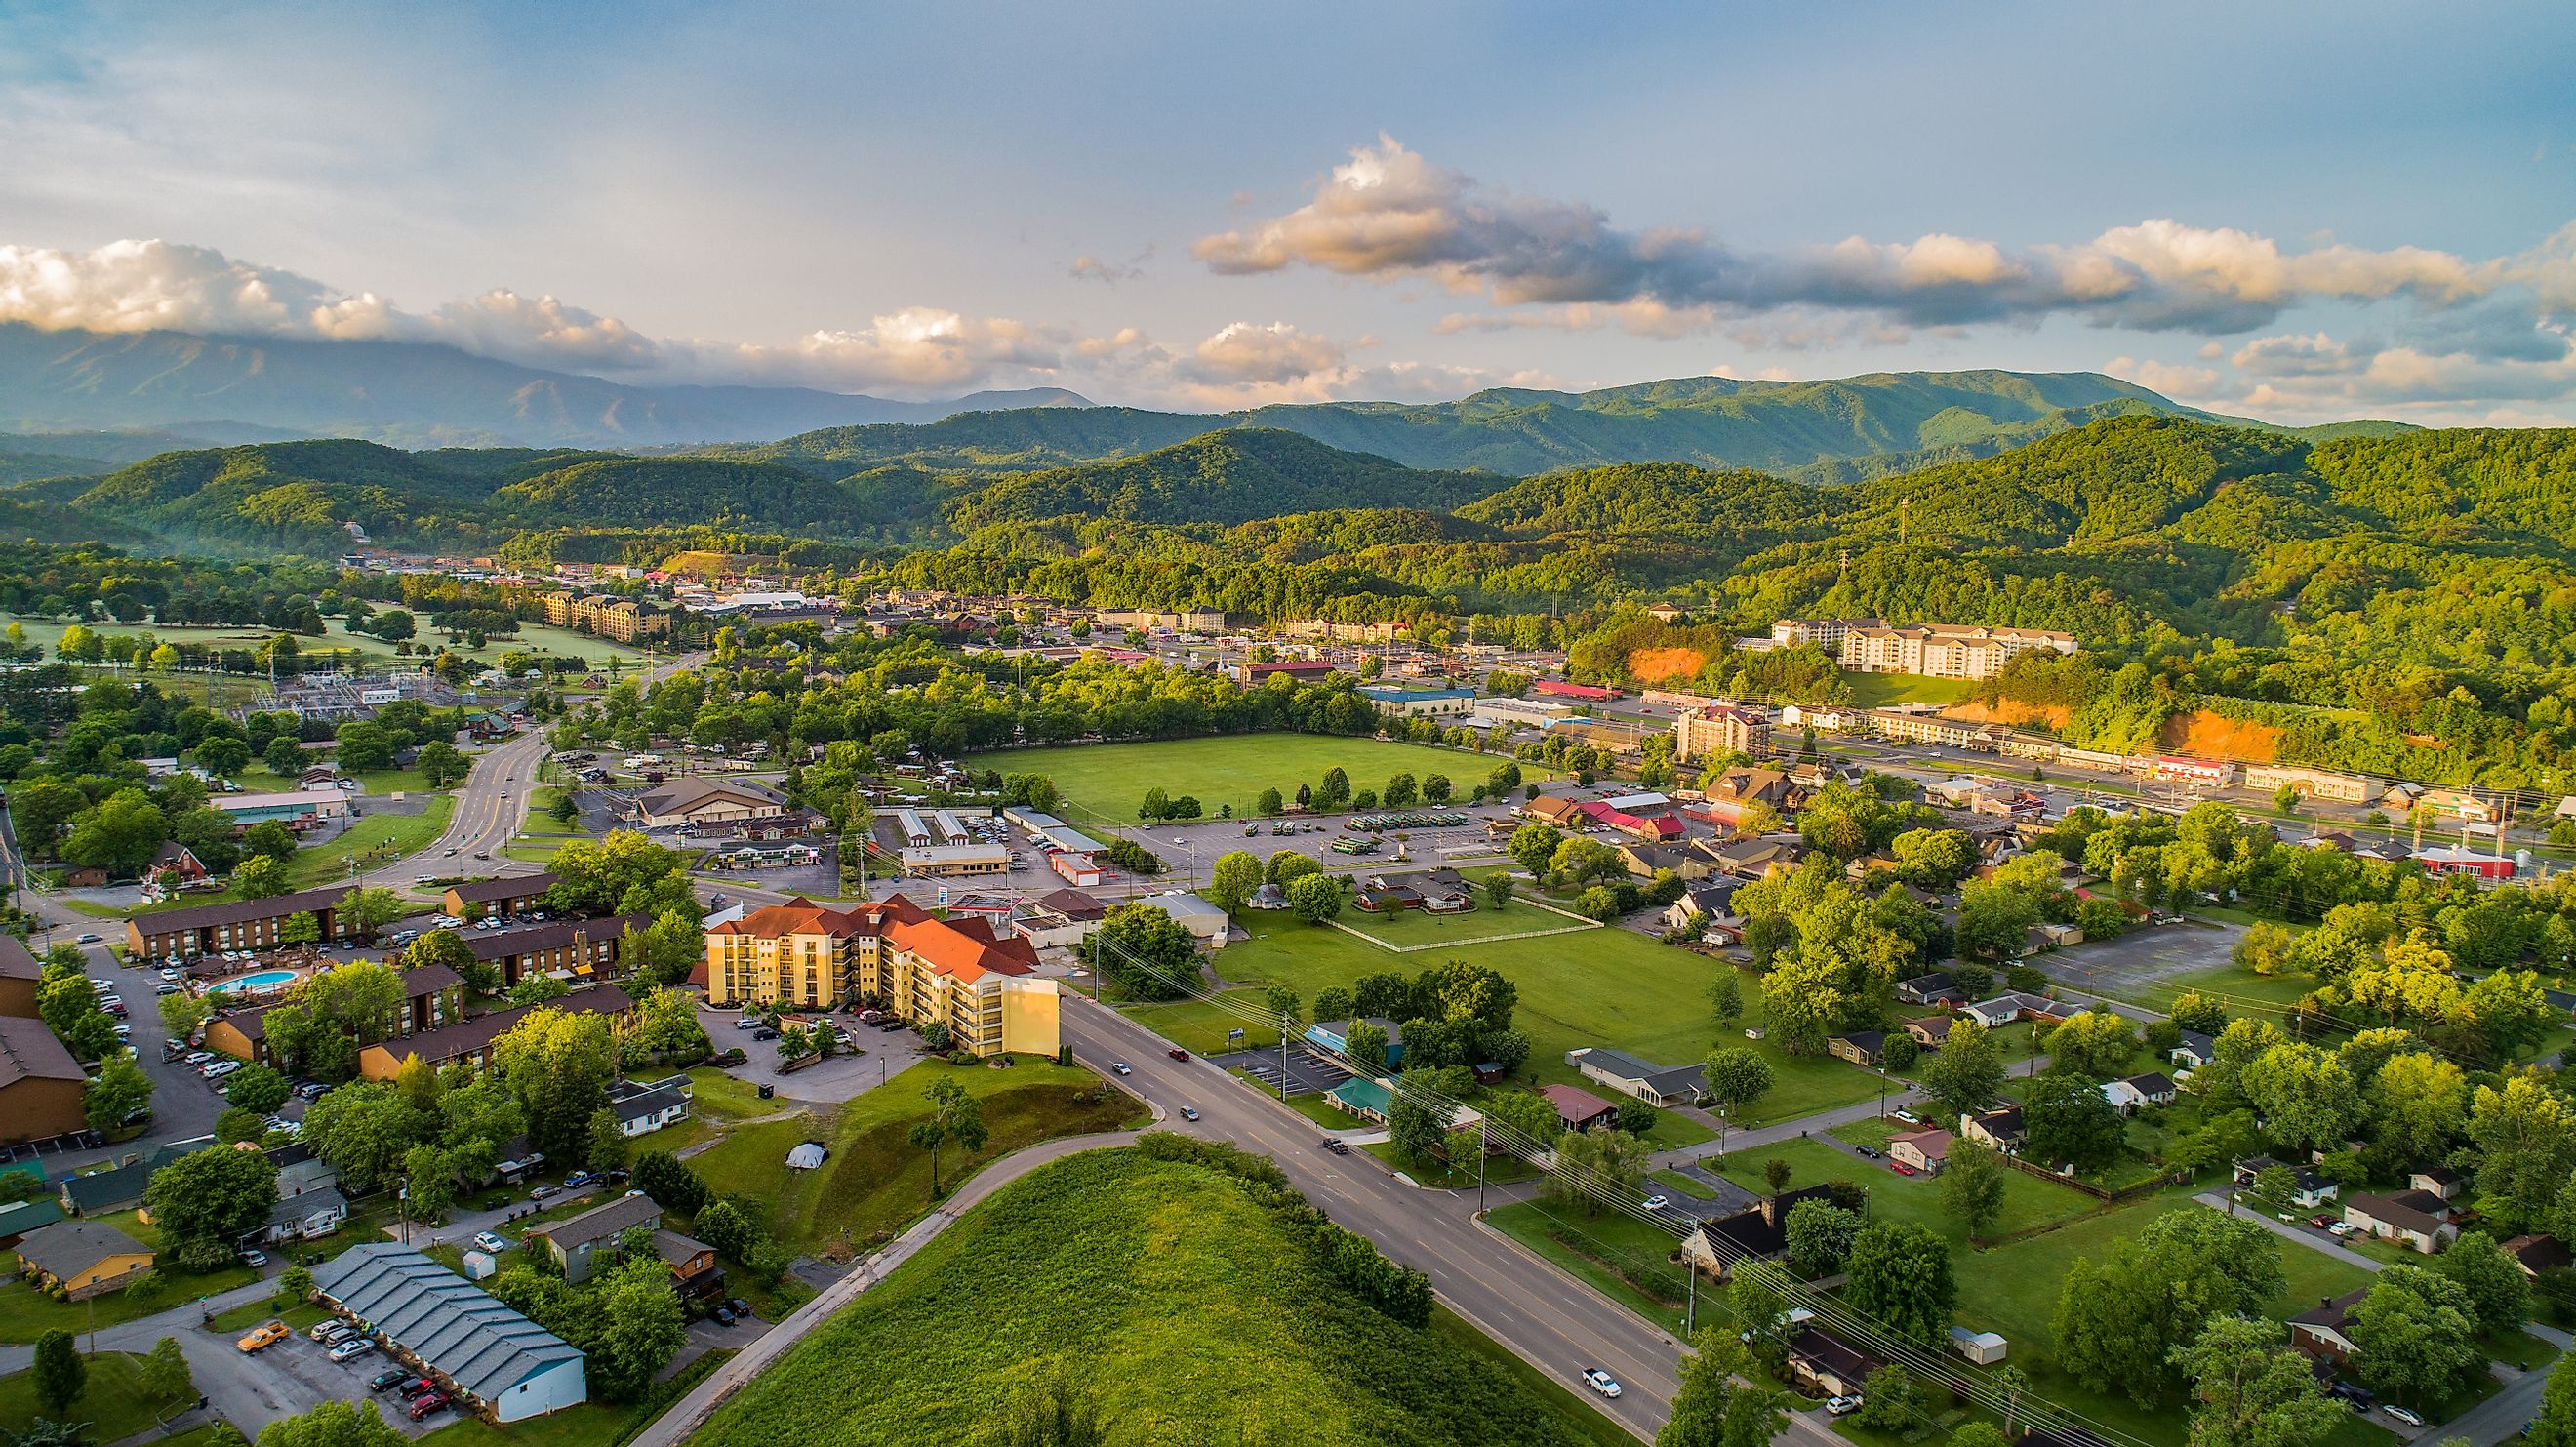 The beautiful town of Pigeon Gorge, Tennessee.